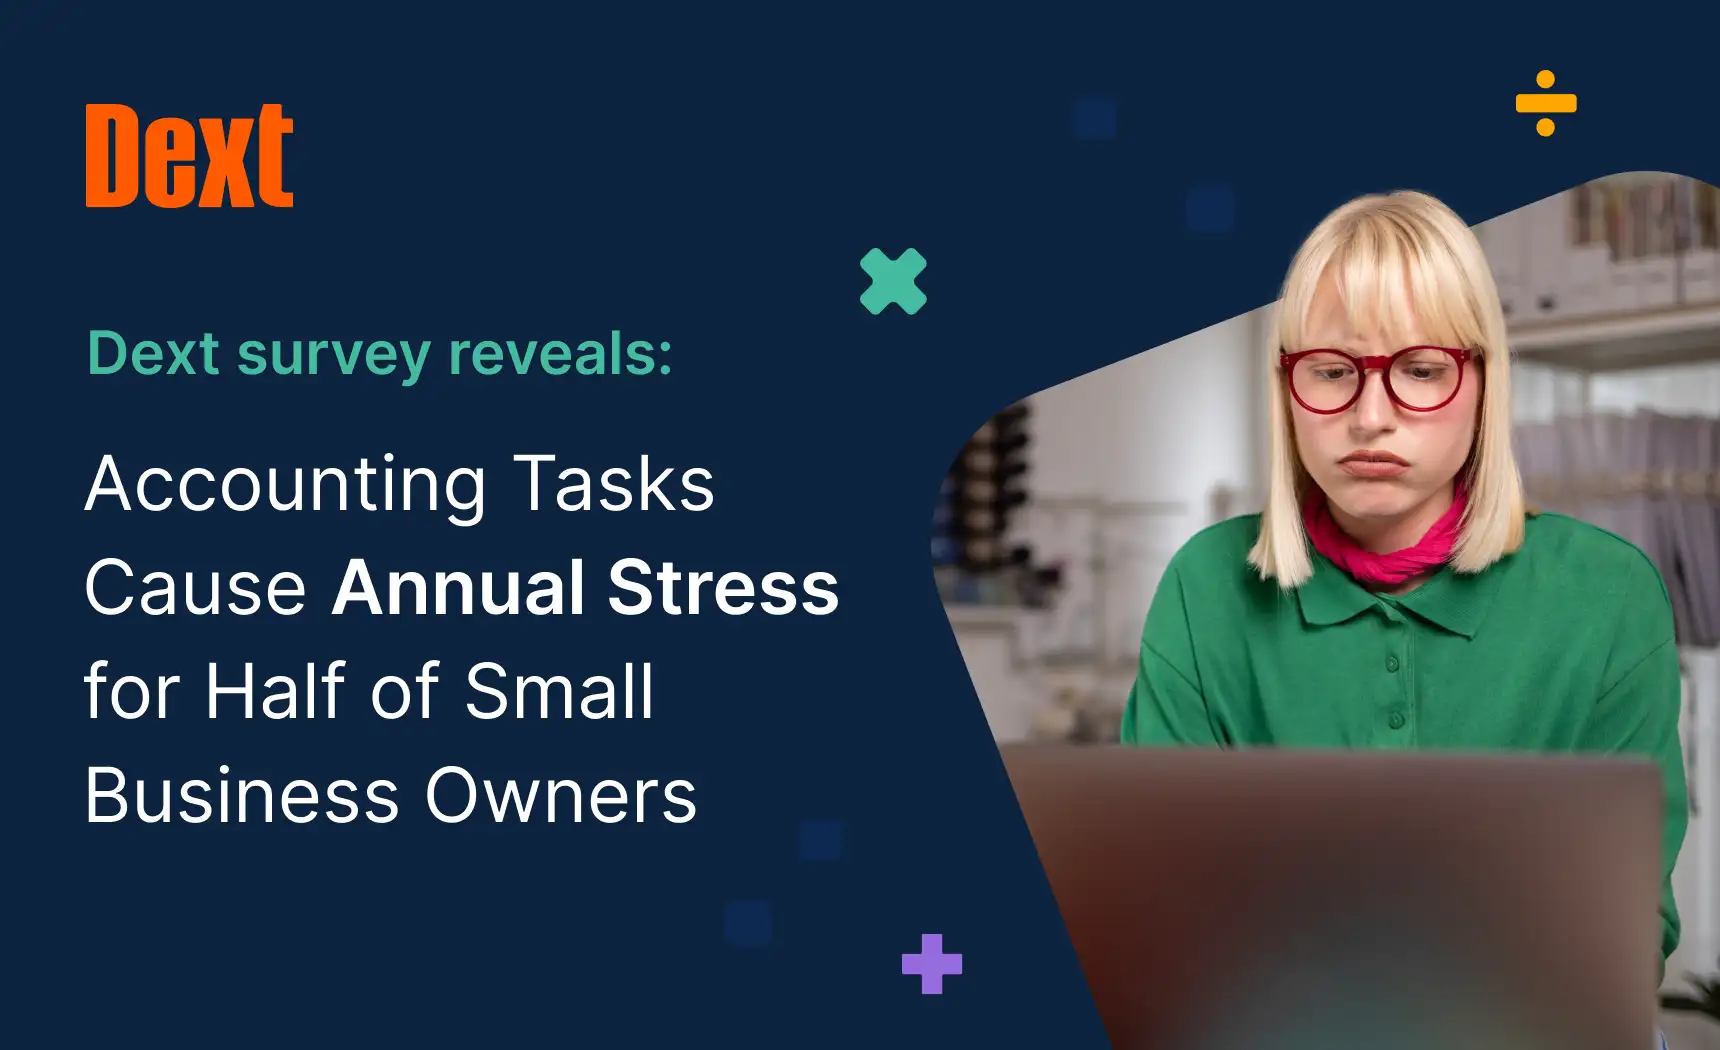 Accounting Tasks Cause Annual Stress for Half of Small Business Owners by Dext logo